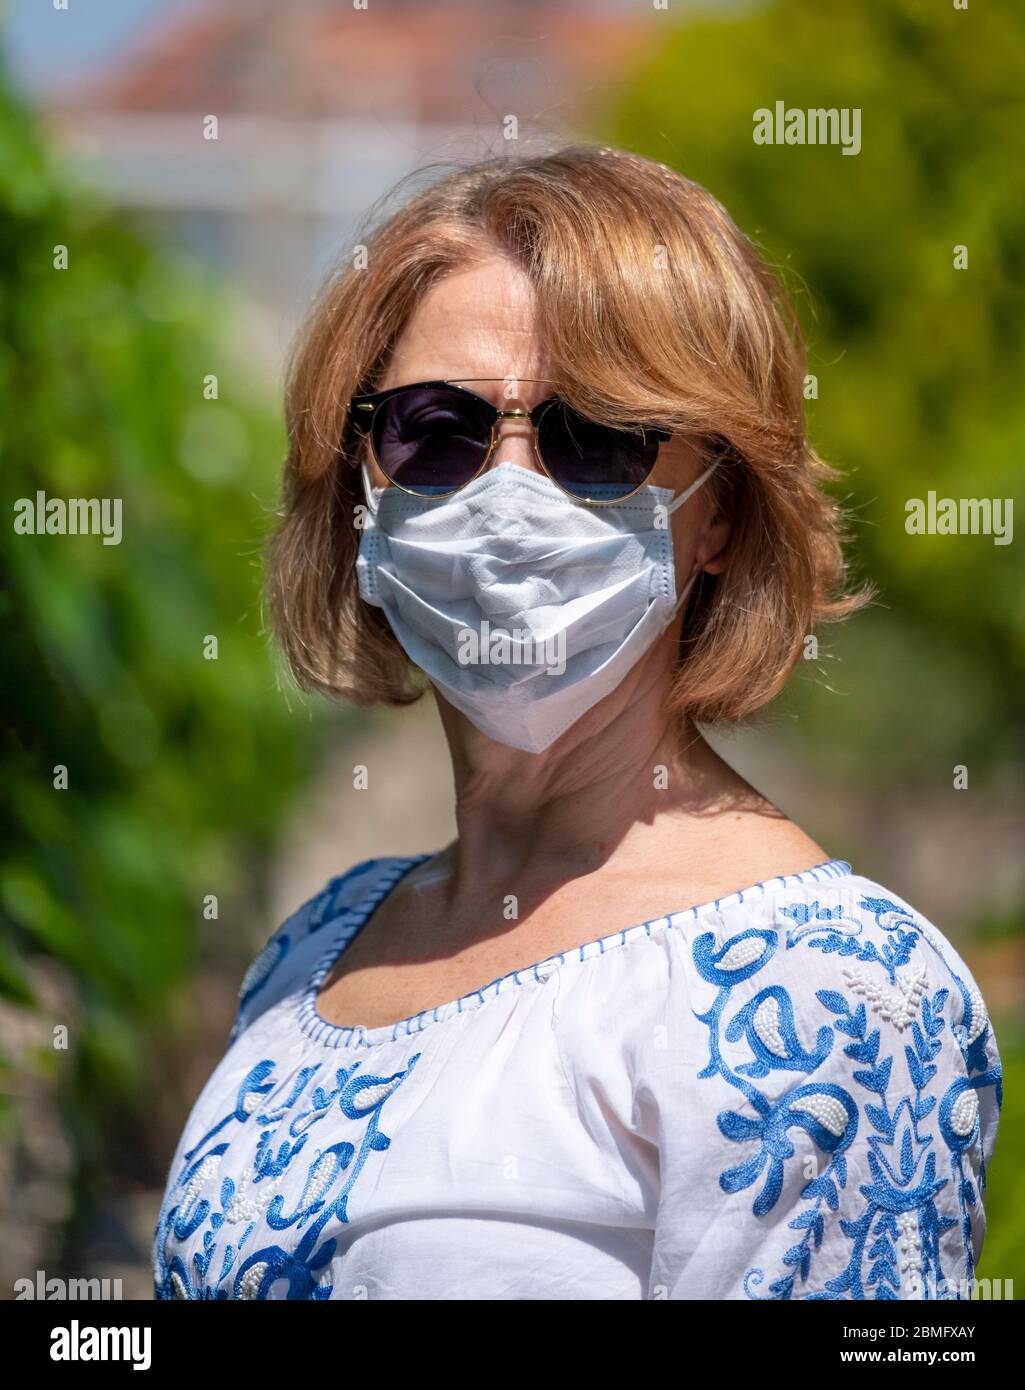 Mugla, Turkey - April 13, 2020: Woman wearing a protective mask to protect herself from corona virus on April 13, 2020. Stock Photo